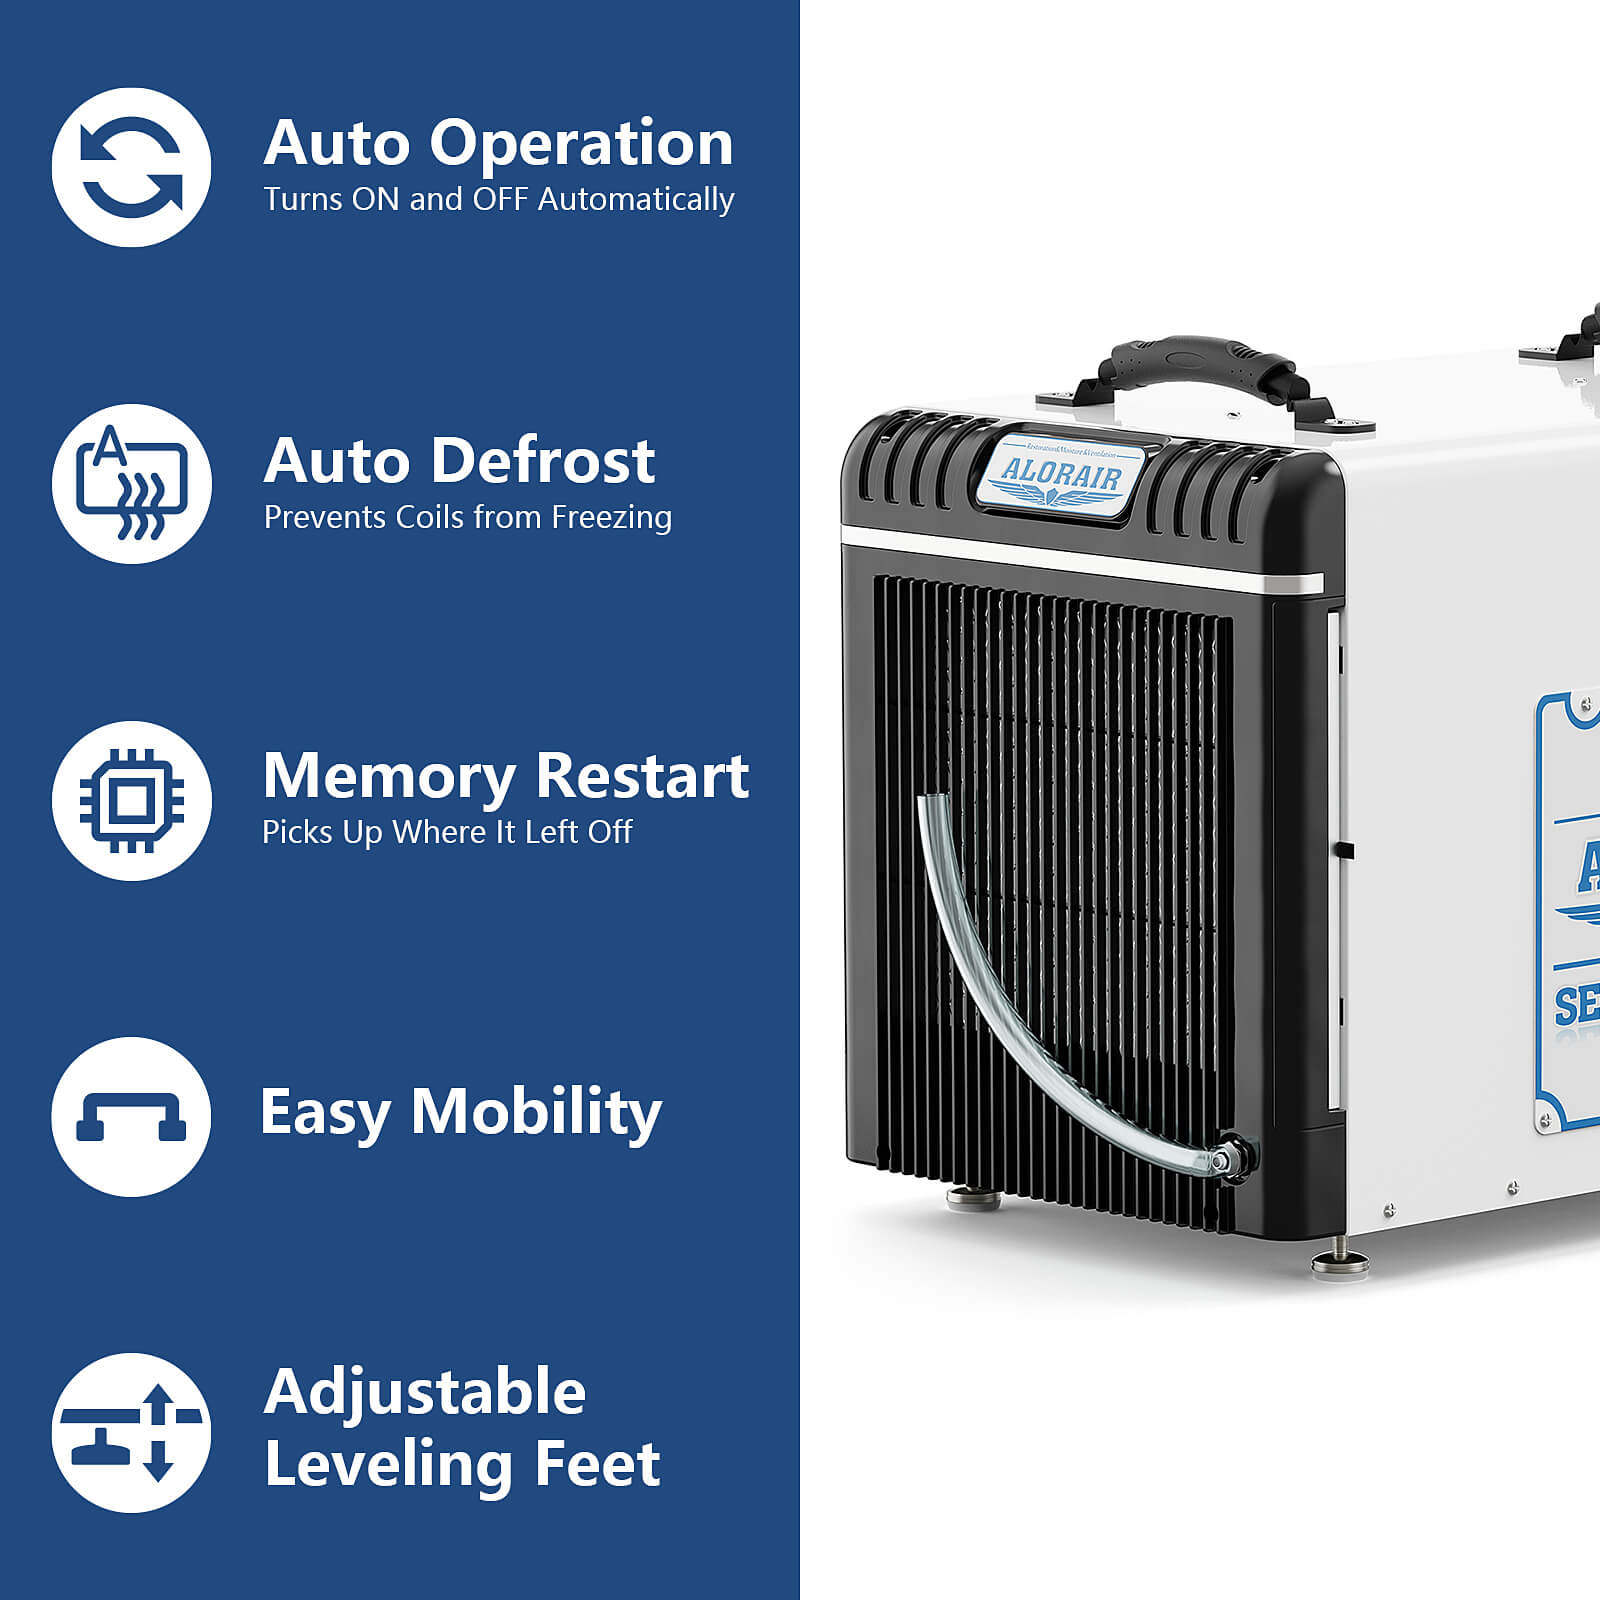 AlorAir Basement/Crawl Space Sentinel HD90 Dehumidifiers 198 PPD (Saturation), 90 PPD (AHAM), Energy Star Listed, 5 Years Warranty, Auto Defrosting System, cETL, up to 2,600 sq. ft, Optional Remote Monitoring AlorAir